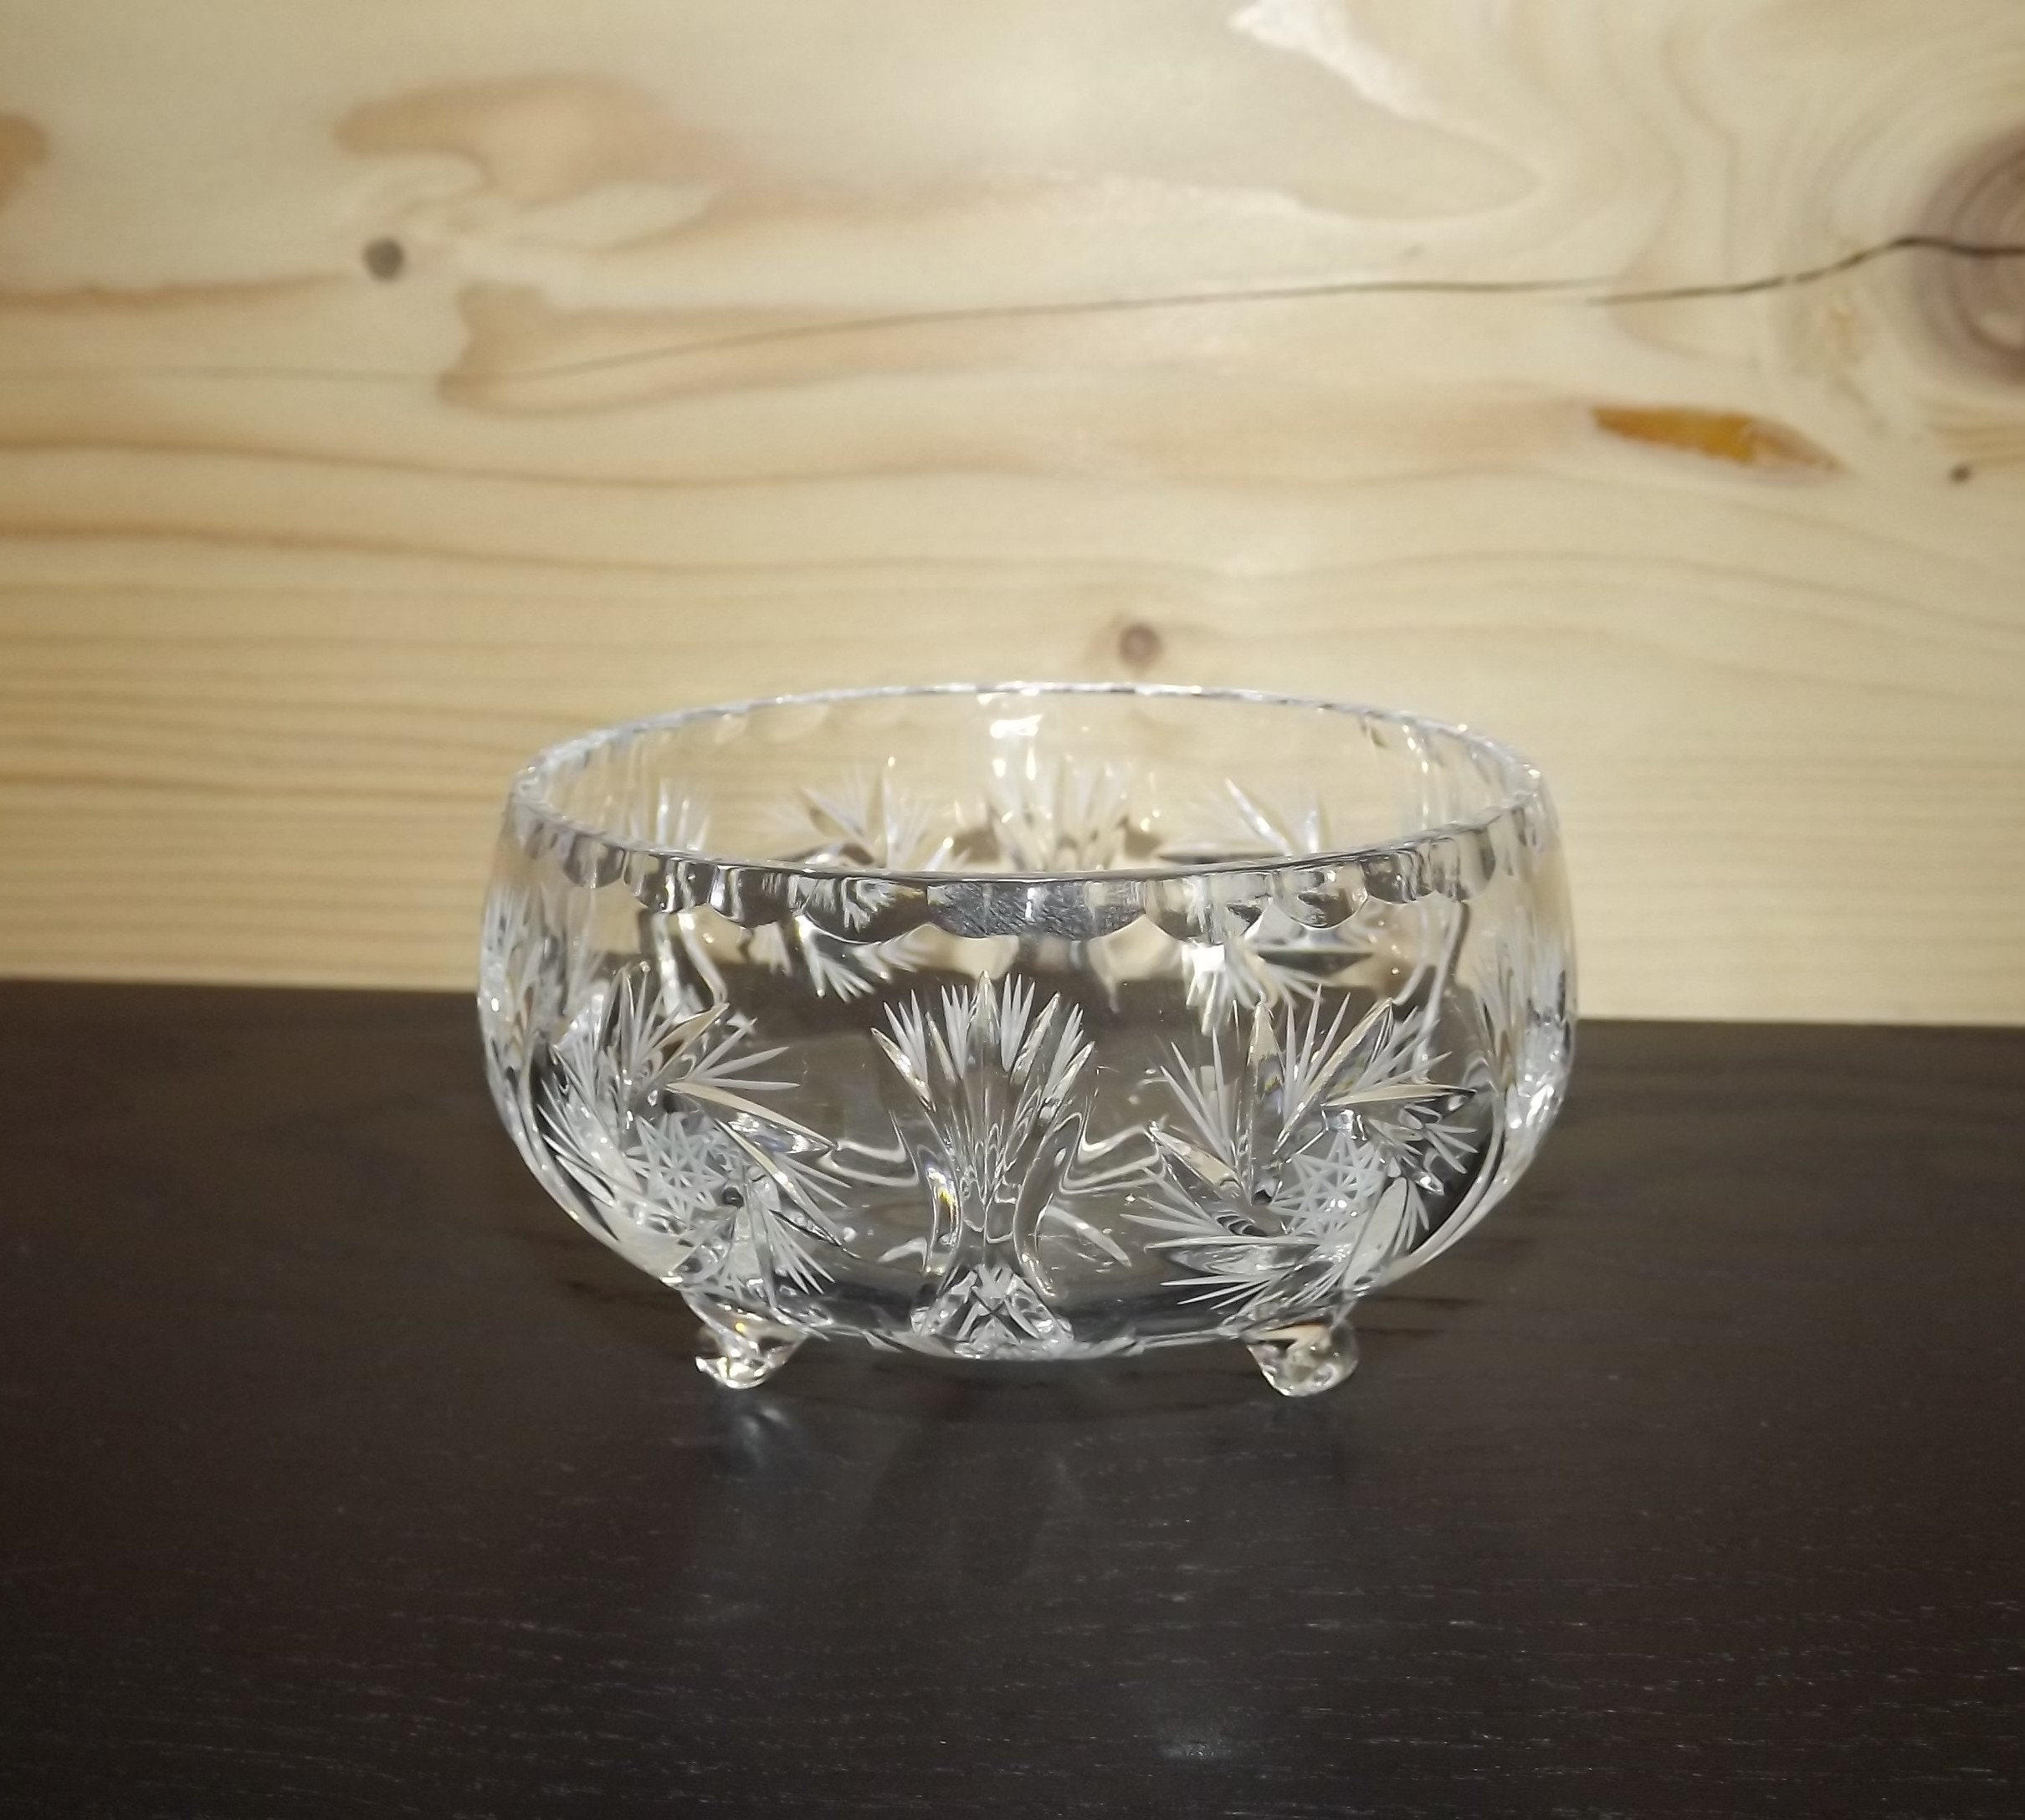 Vintage Sweet Little Crystal Dish Bonbonniere - Jewelry Ring From Poland Cup With Feet Wedding Gift